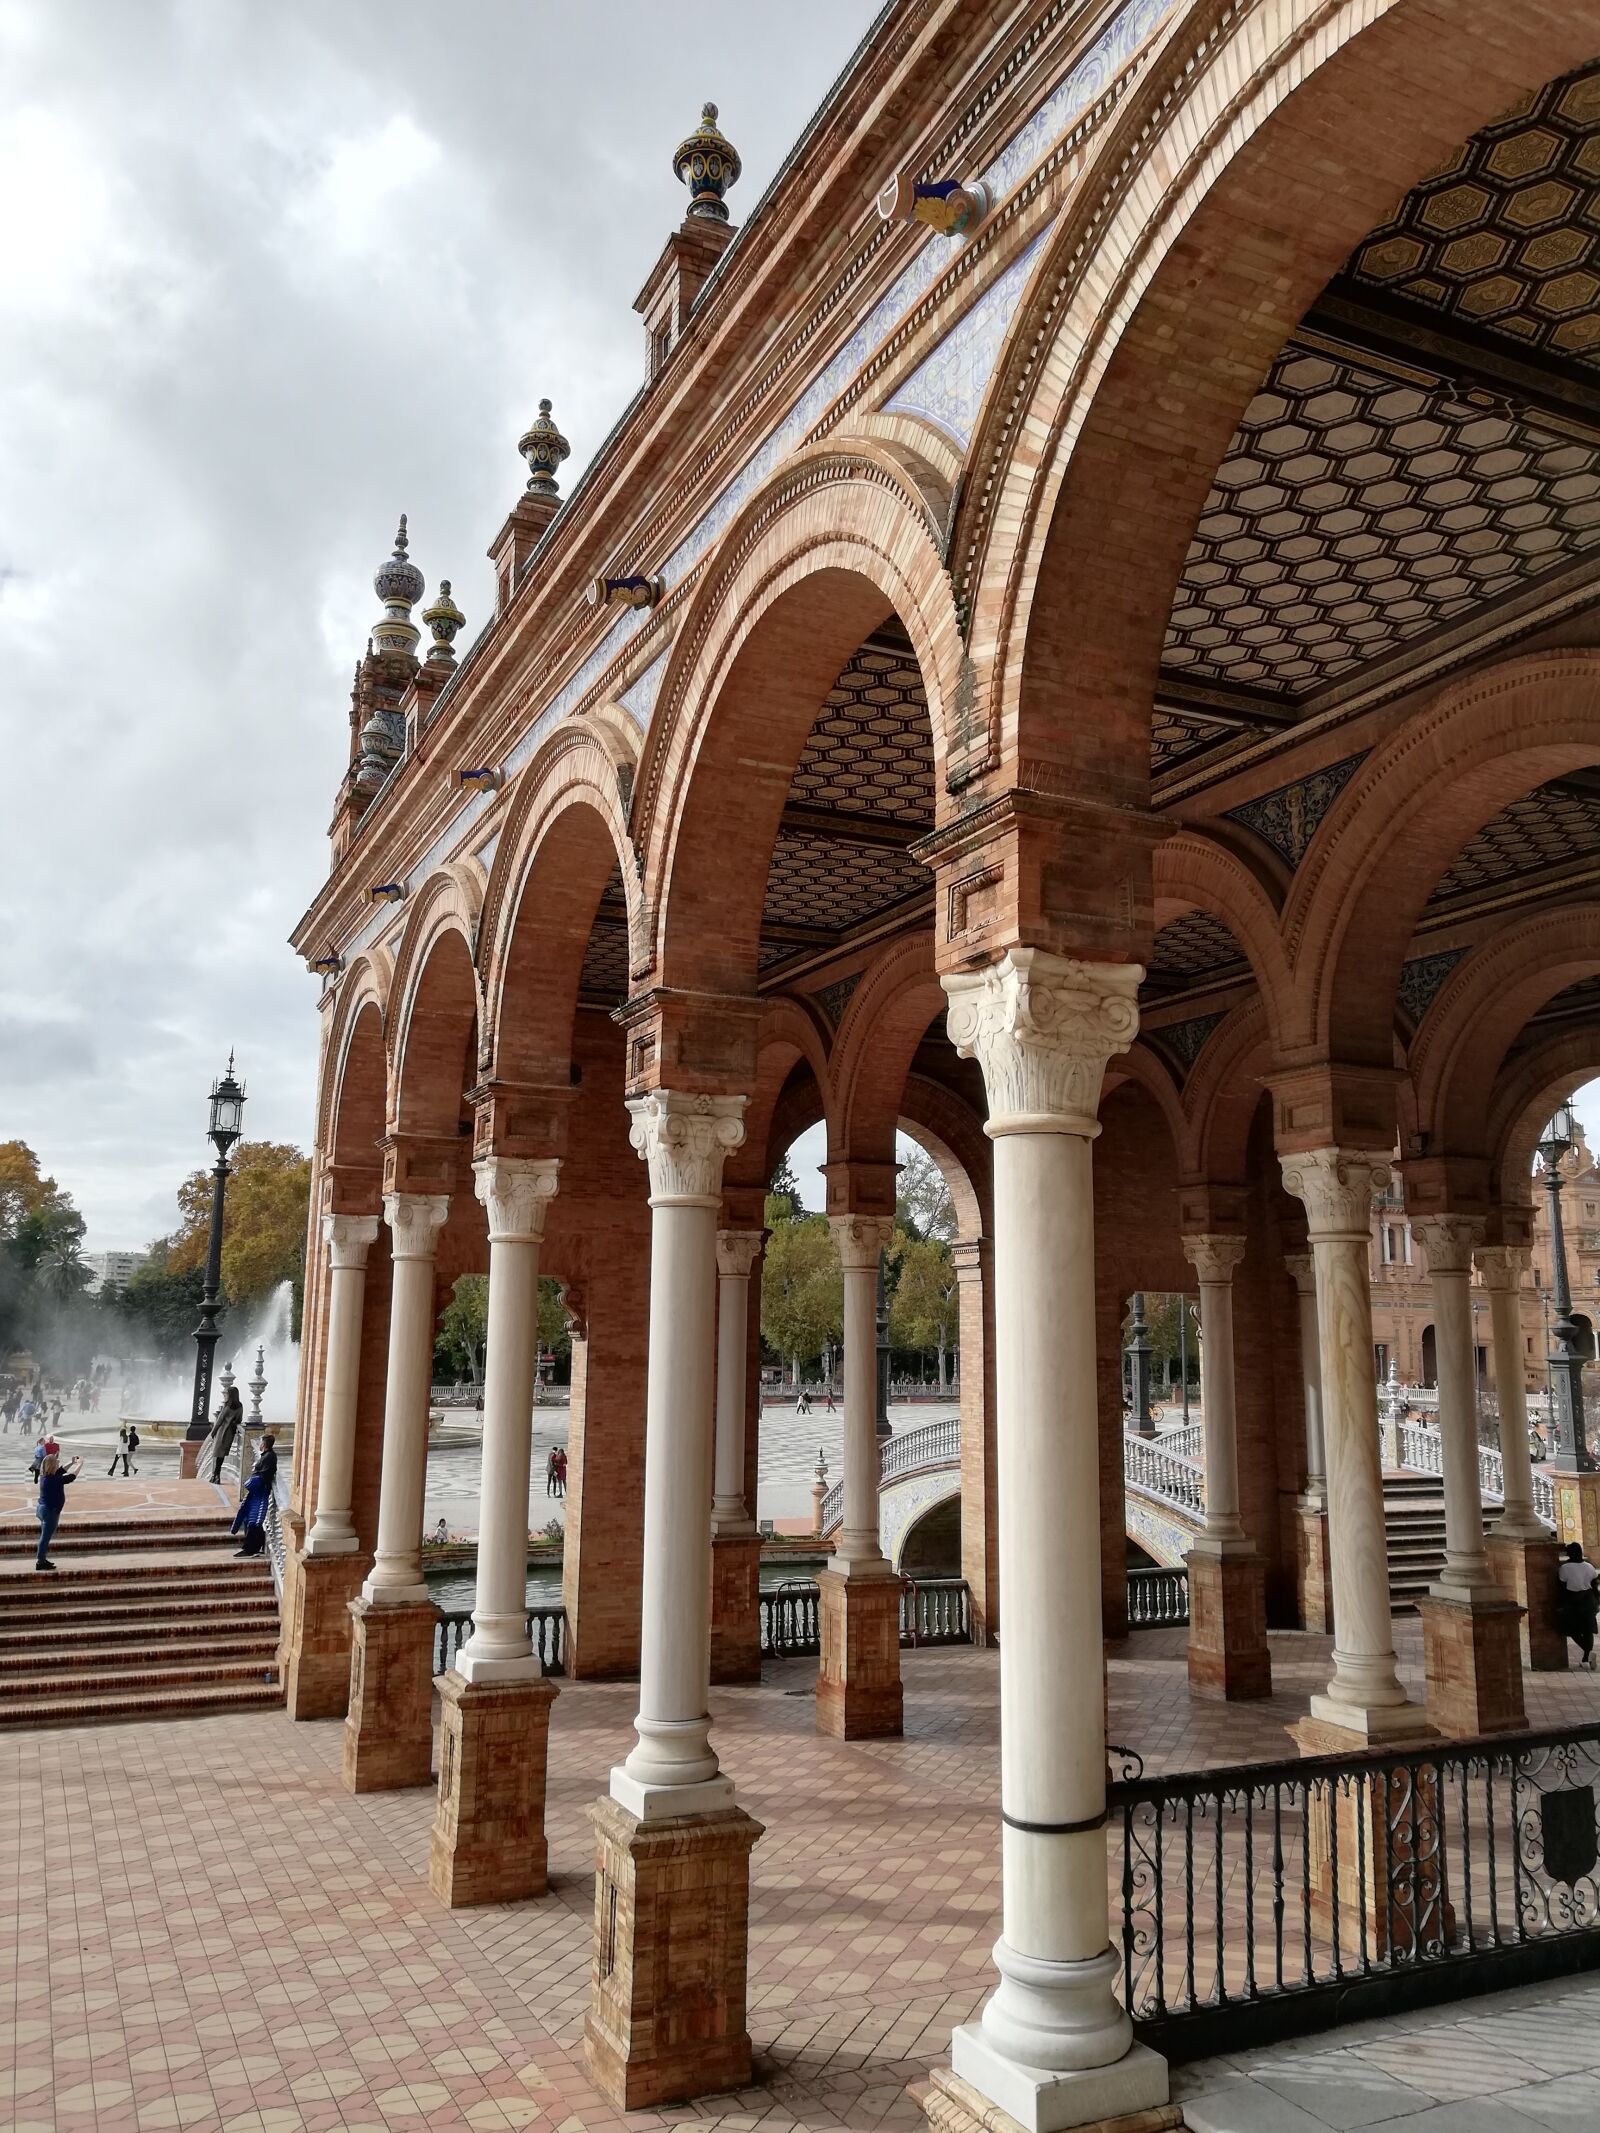 HUAWEI Mate 10 Lite sample photo. Monuments, park, architecture photography